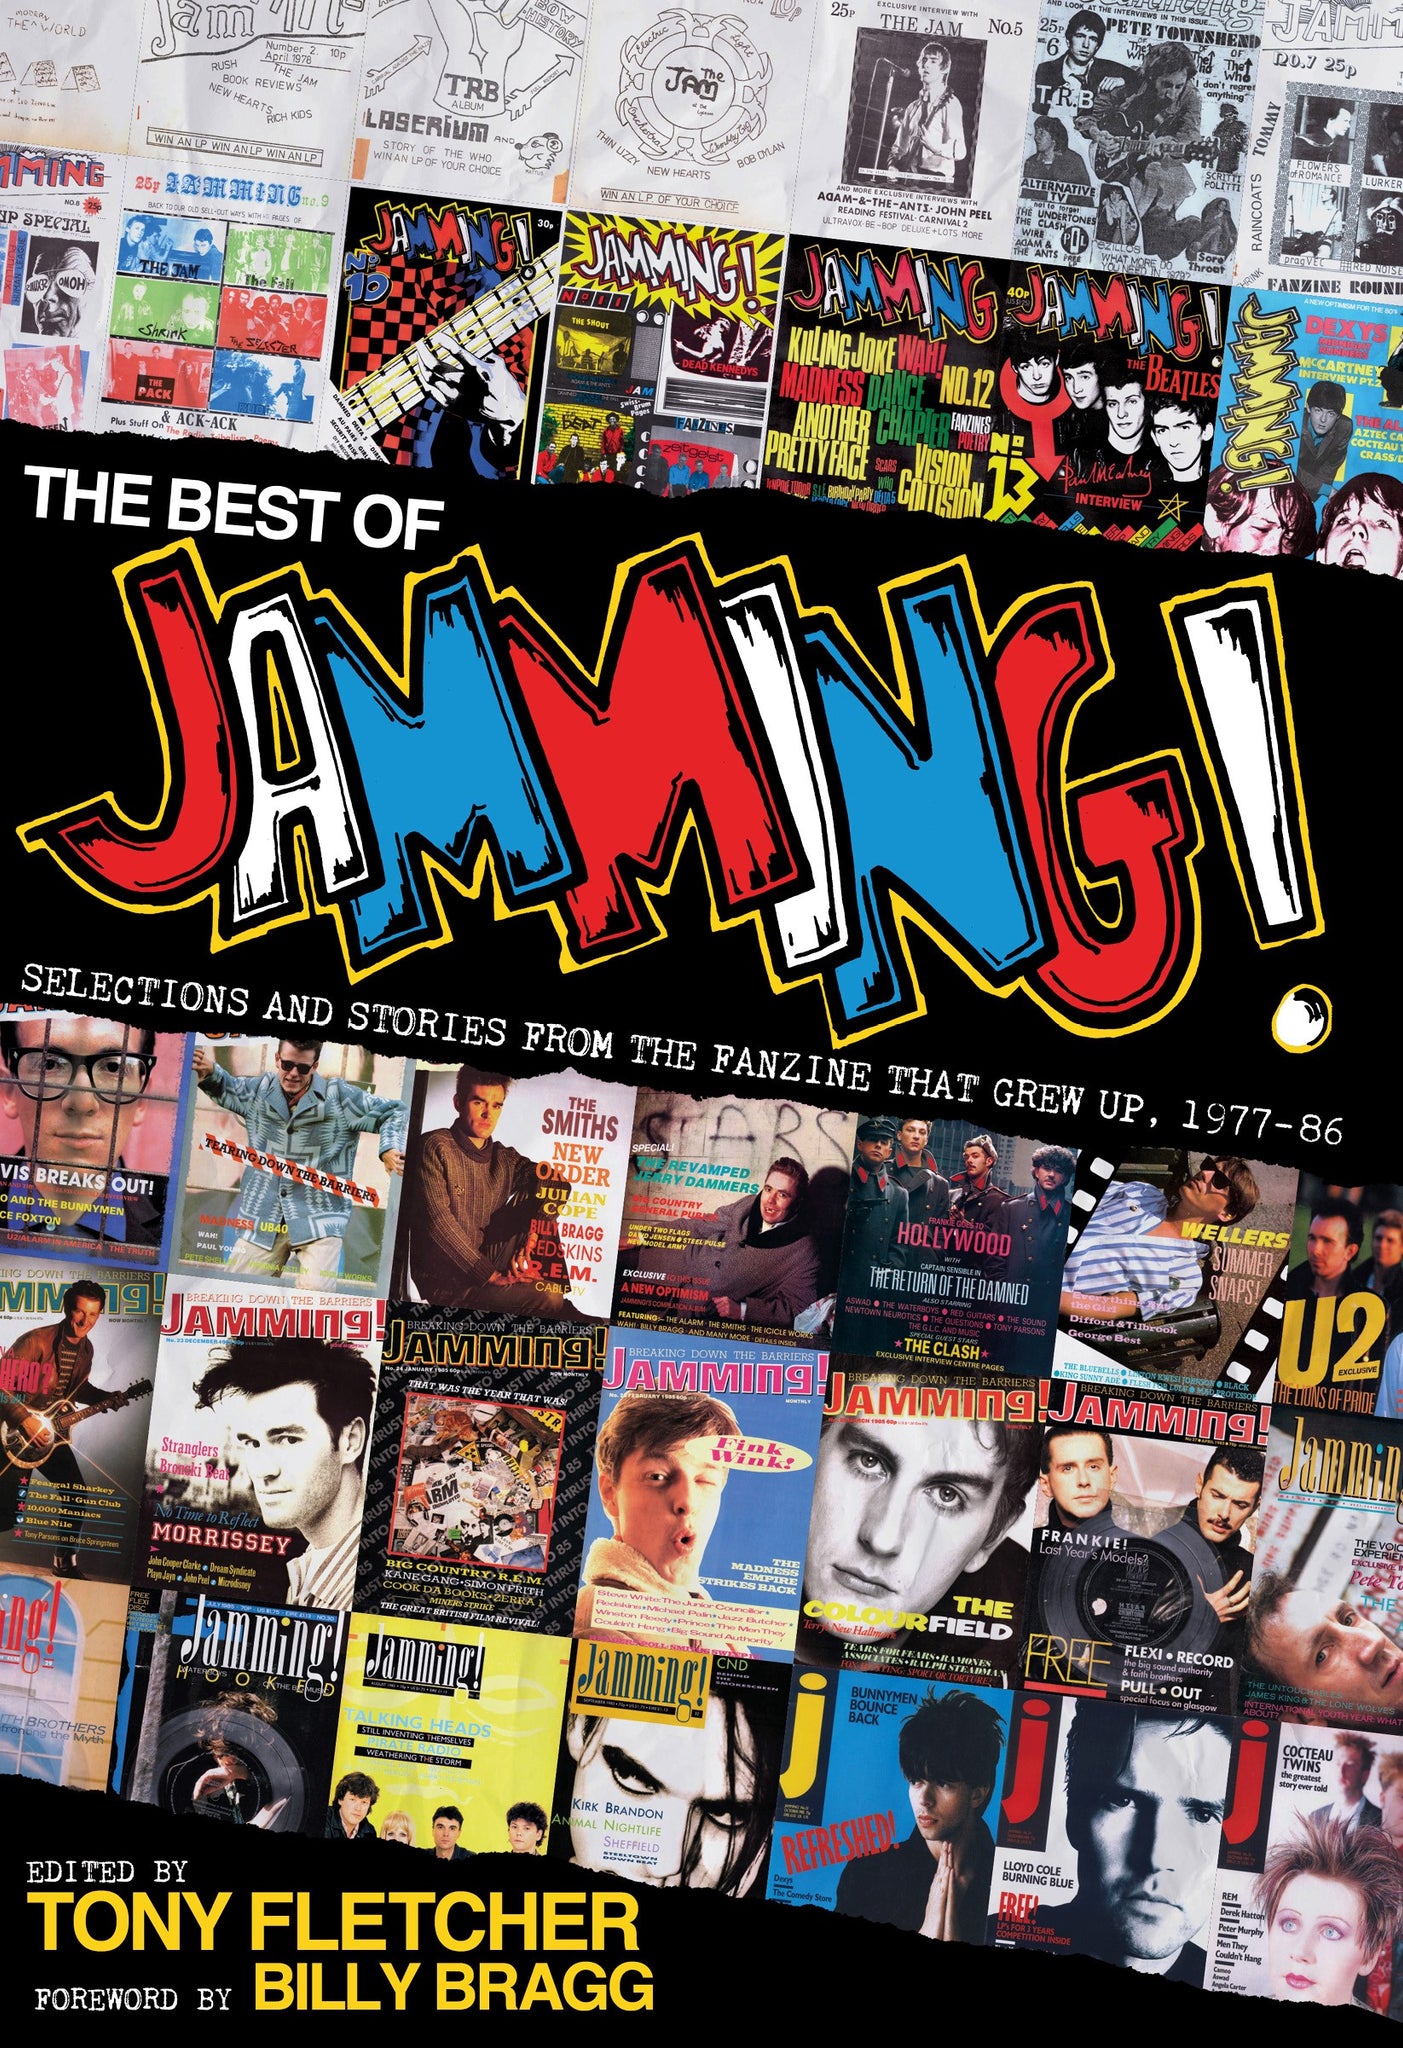 TONY FLETCHER – The Best of Jamming! Selections and Stories from the Fanzine That Grew Up, 1977-86